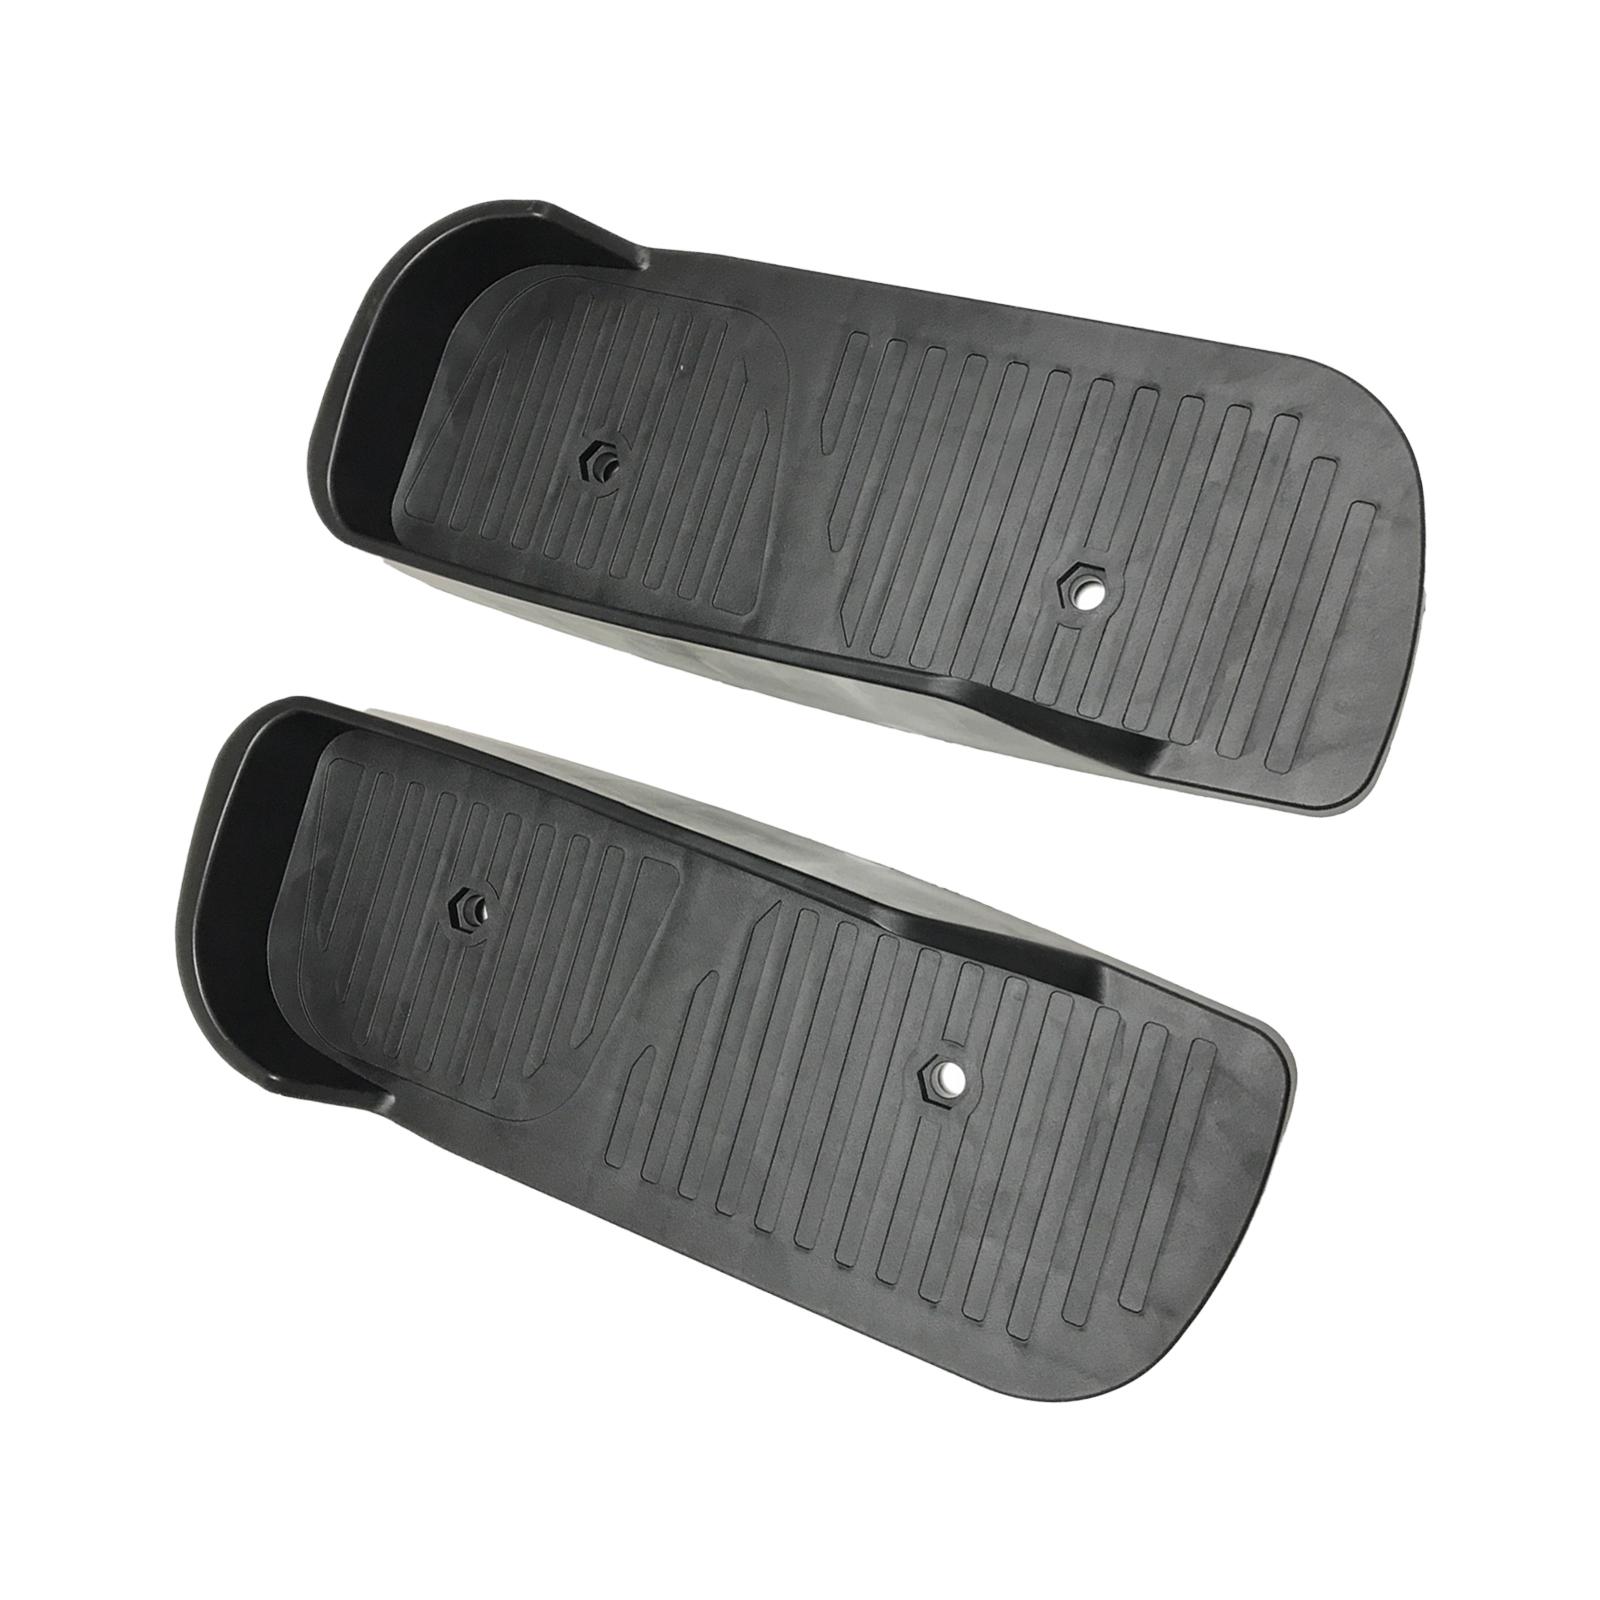 2Pcs Trainer Machine Foot Pedals Non Slip Fittings for Workout Fitness Bike